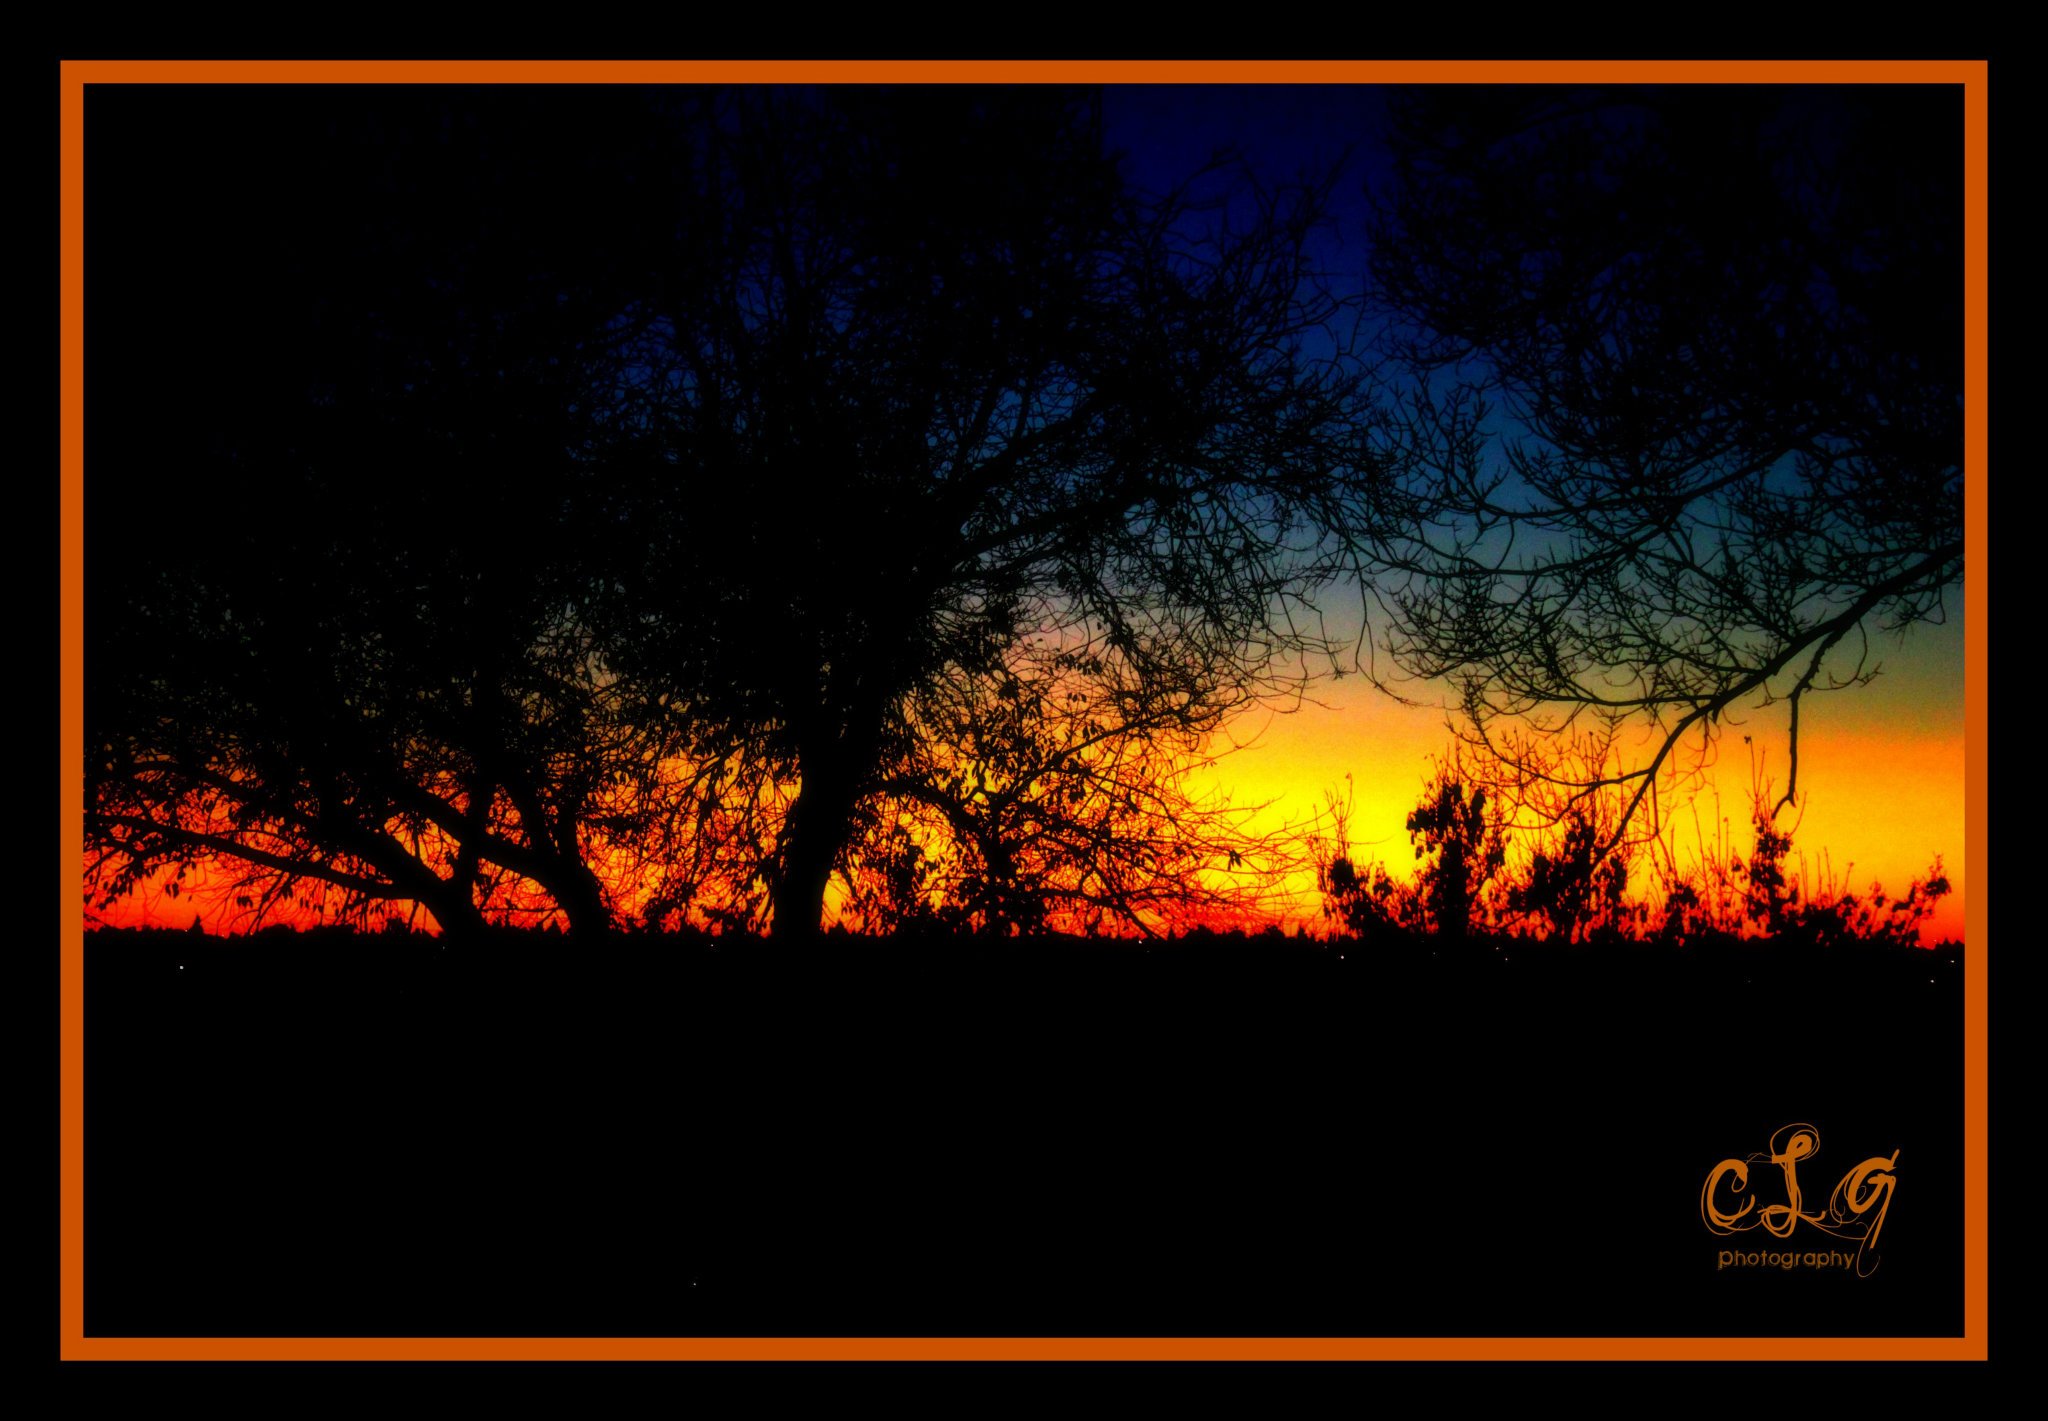 My photography - Sunset through the trees